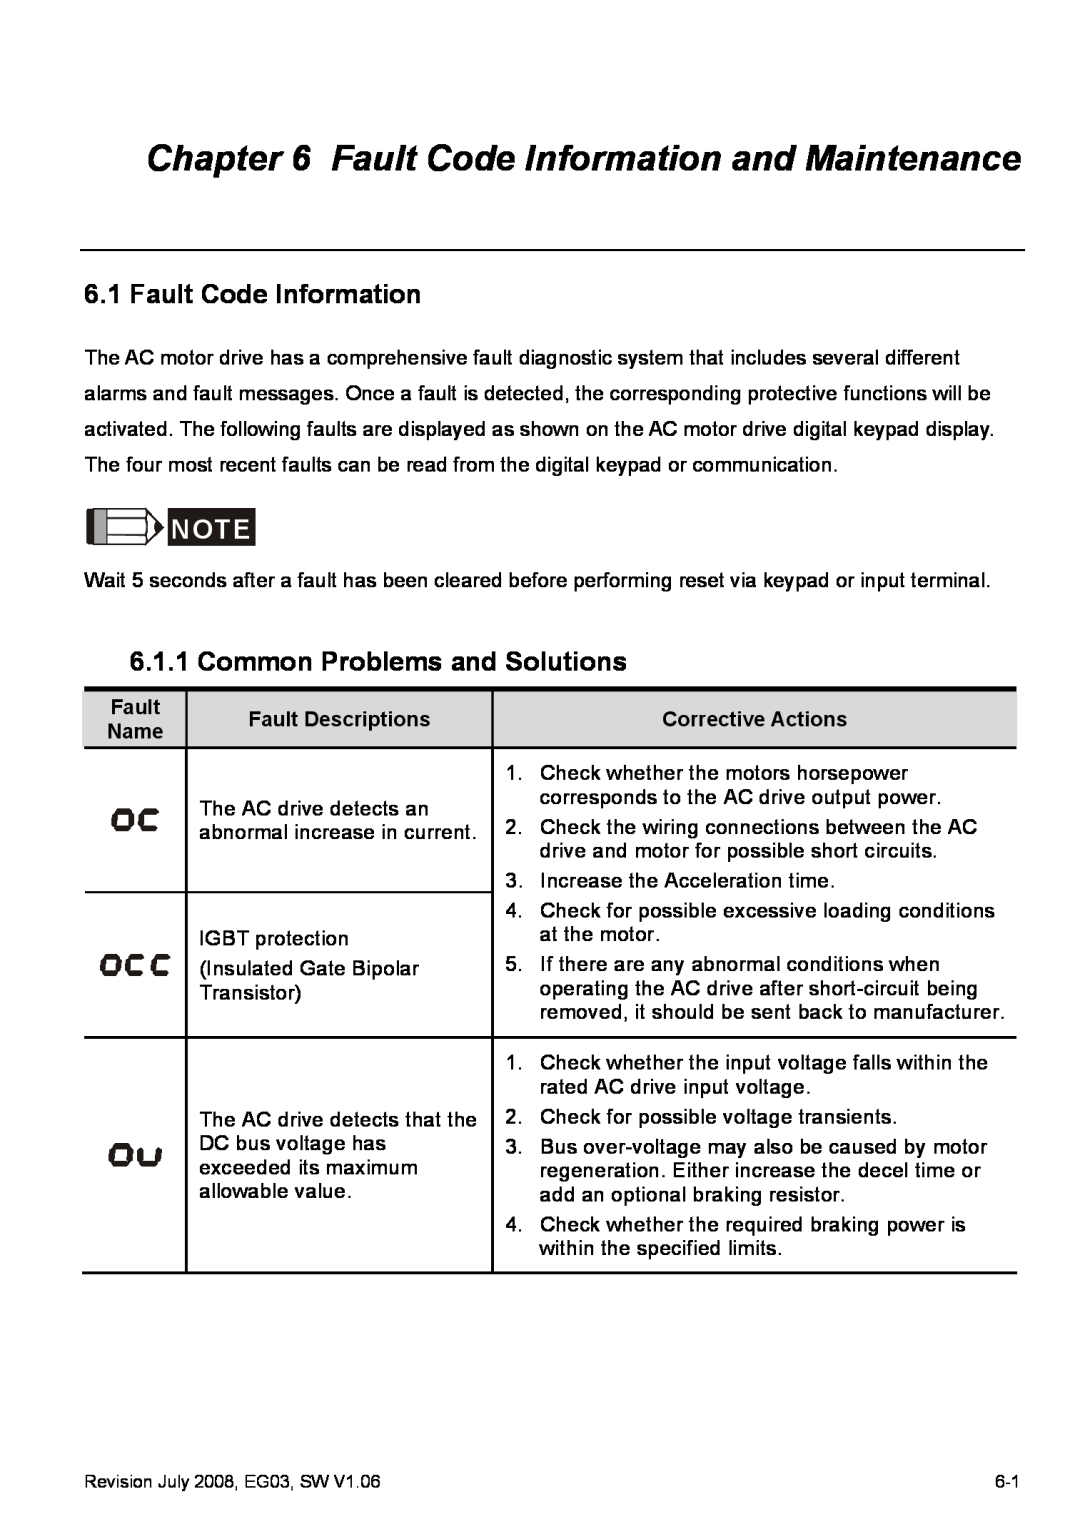 Delta Electronics VFD-G manual Fault Code Information and Maintenance, Common Problems and Solutions 